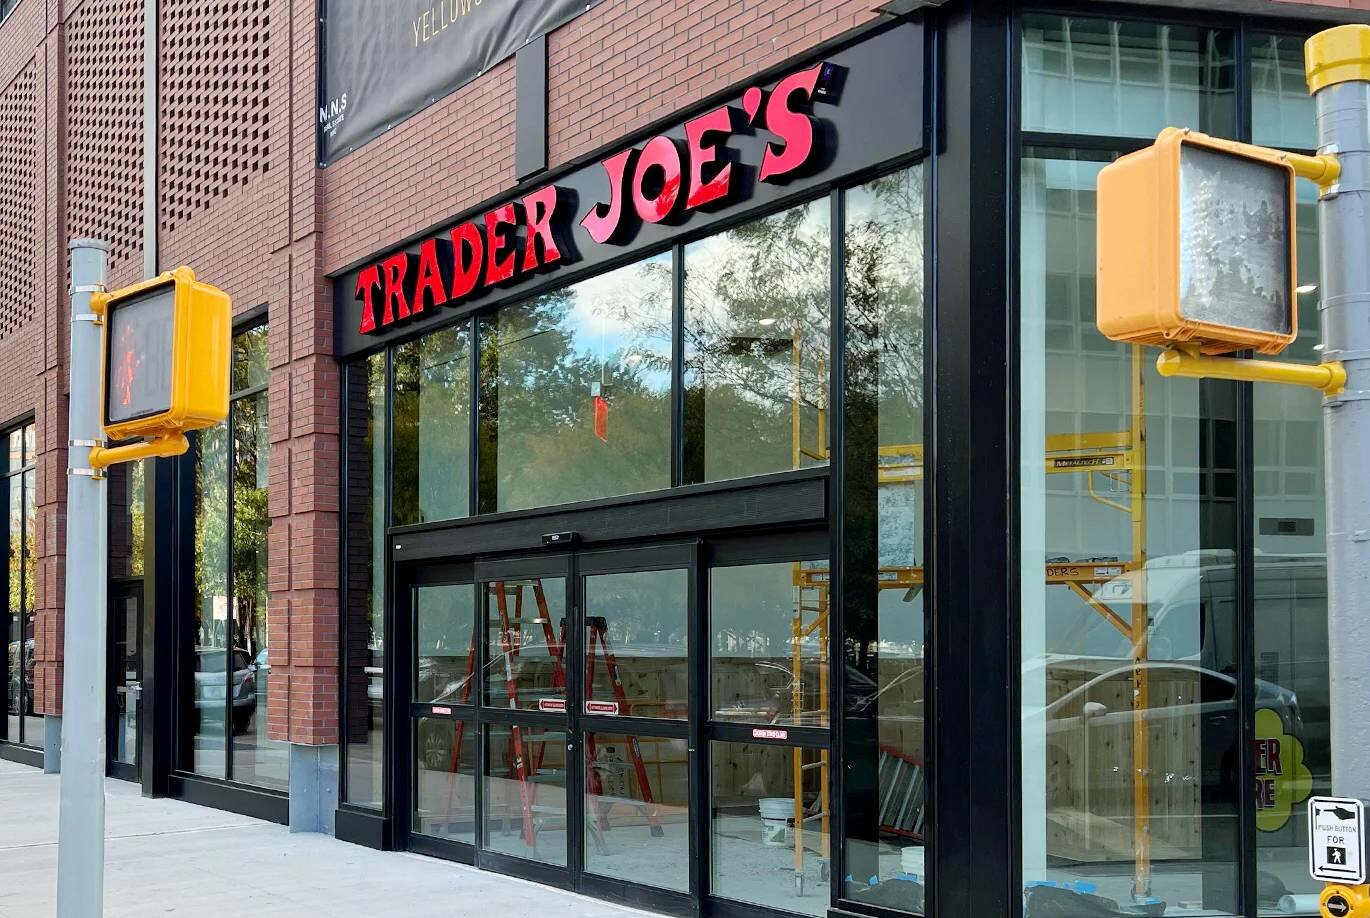 Trader Joe's is not currently planning a location in Springfield, according to Public Relations Manager Nakia Rohde.